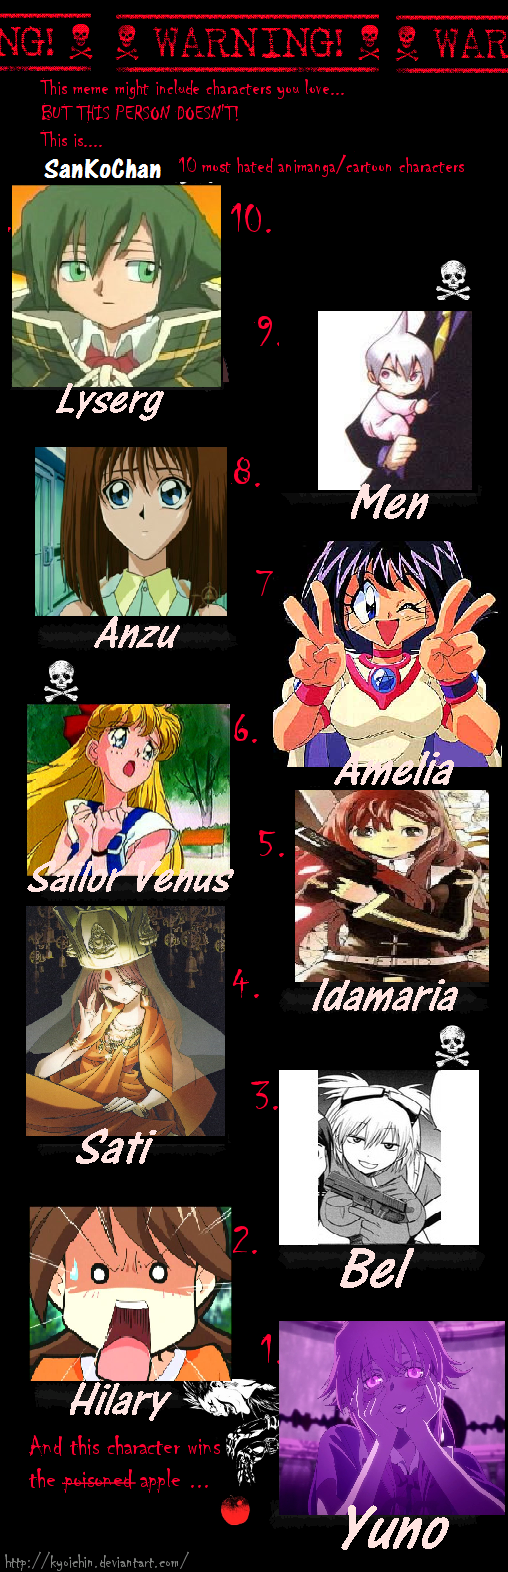 Who would win, your favorite anime character or your most hated